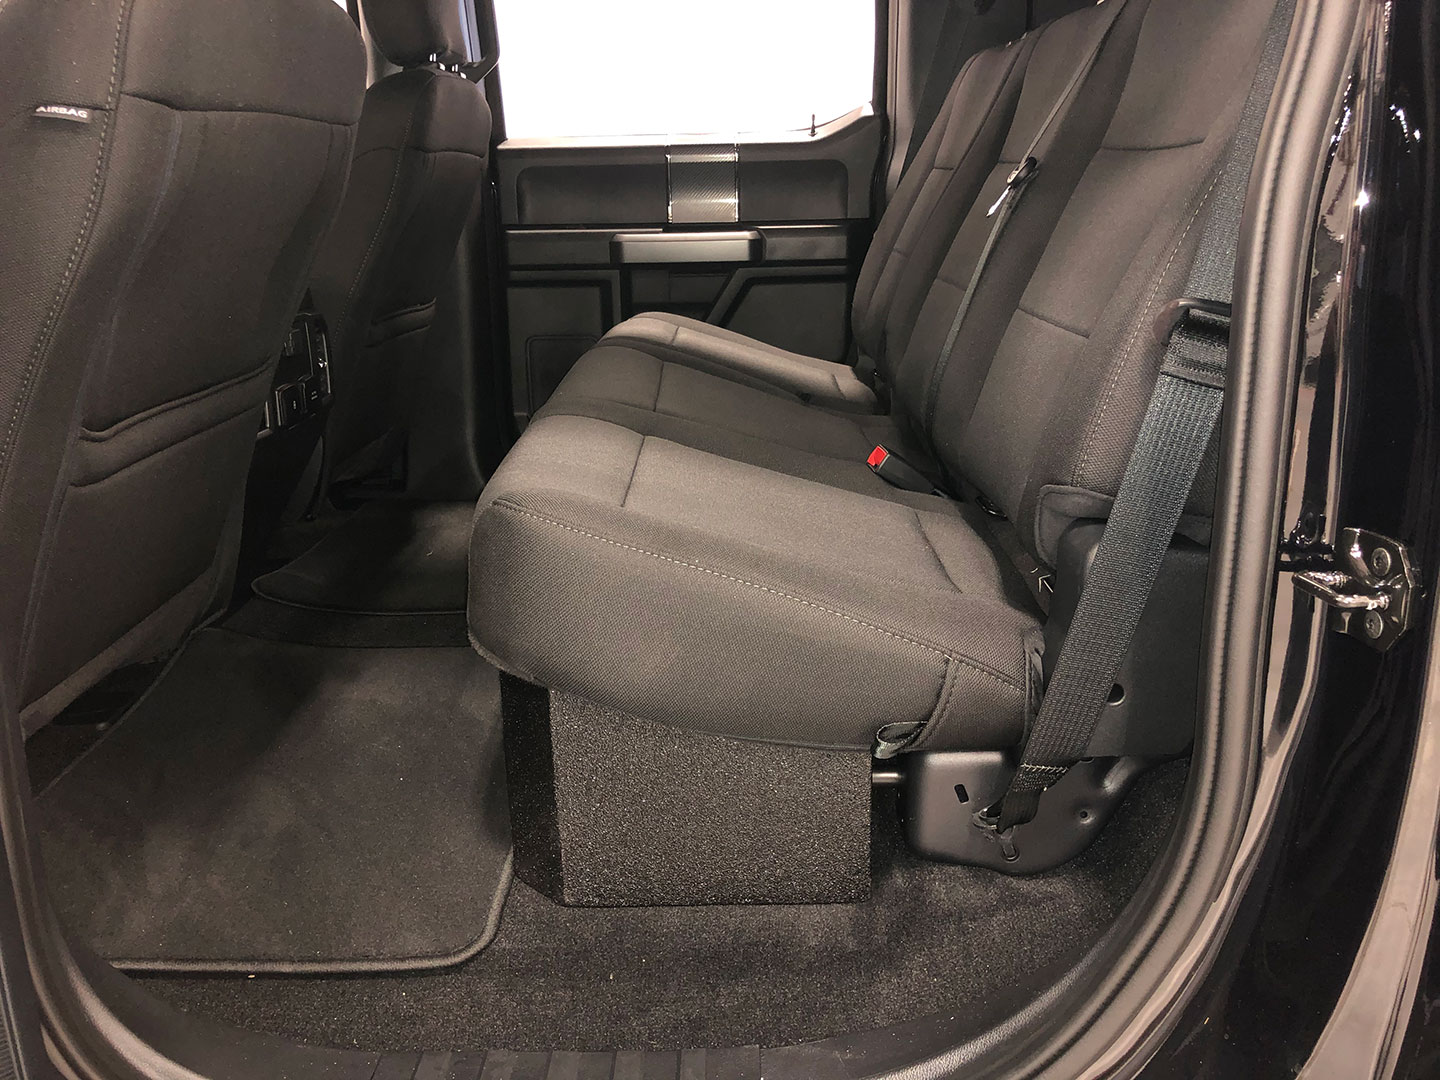 Ford Under Seat cabinet